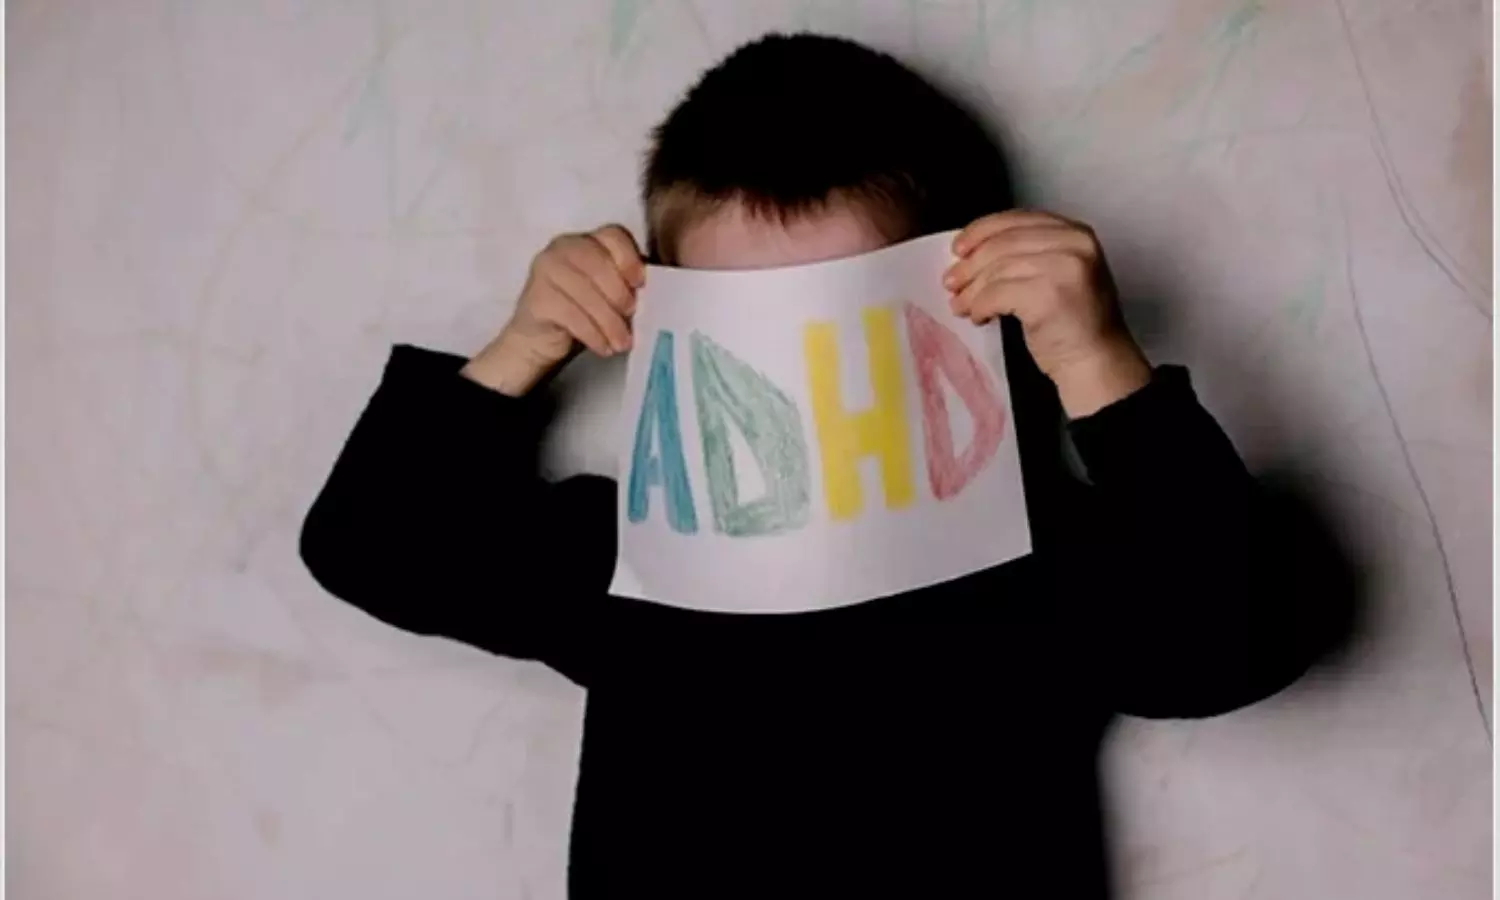 Early-term births associated with higher rate of ADHD finds study